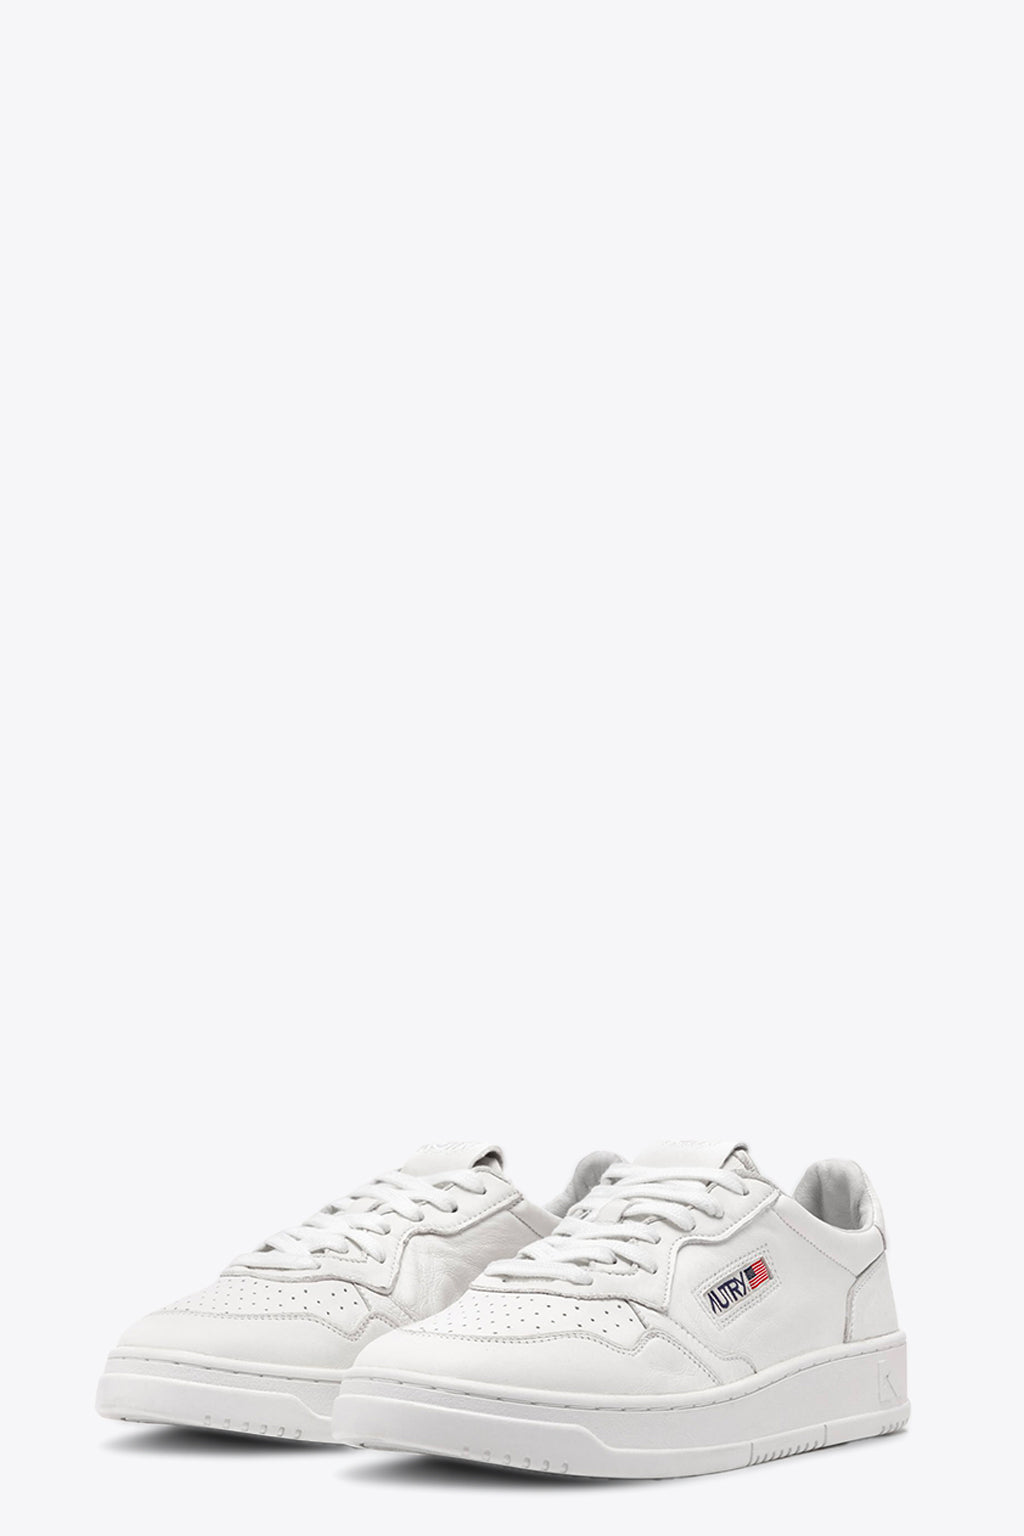 alt-image__White-leather-low-sneaker---Medalist-